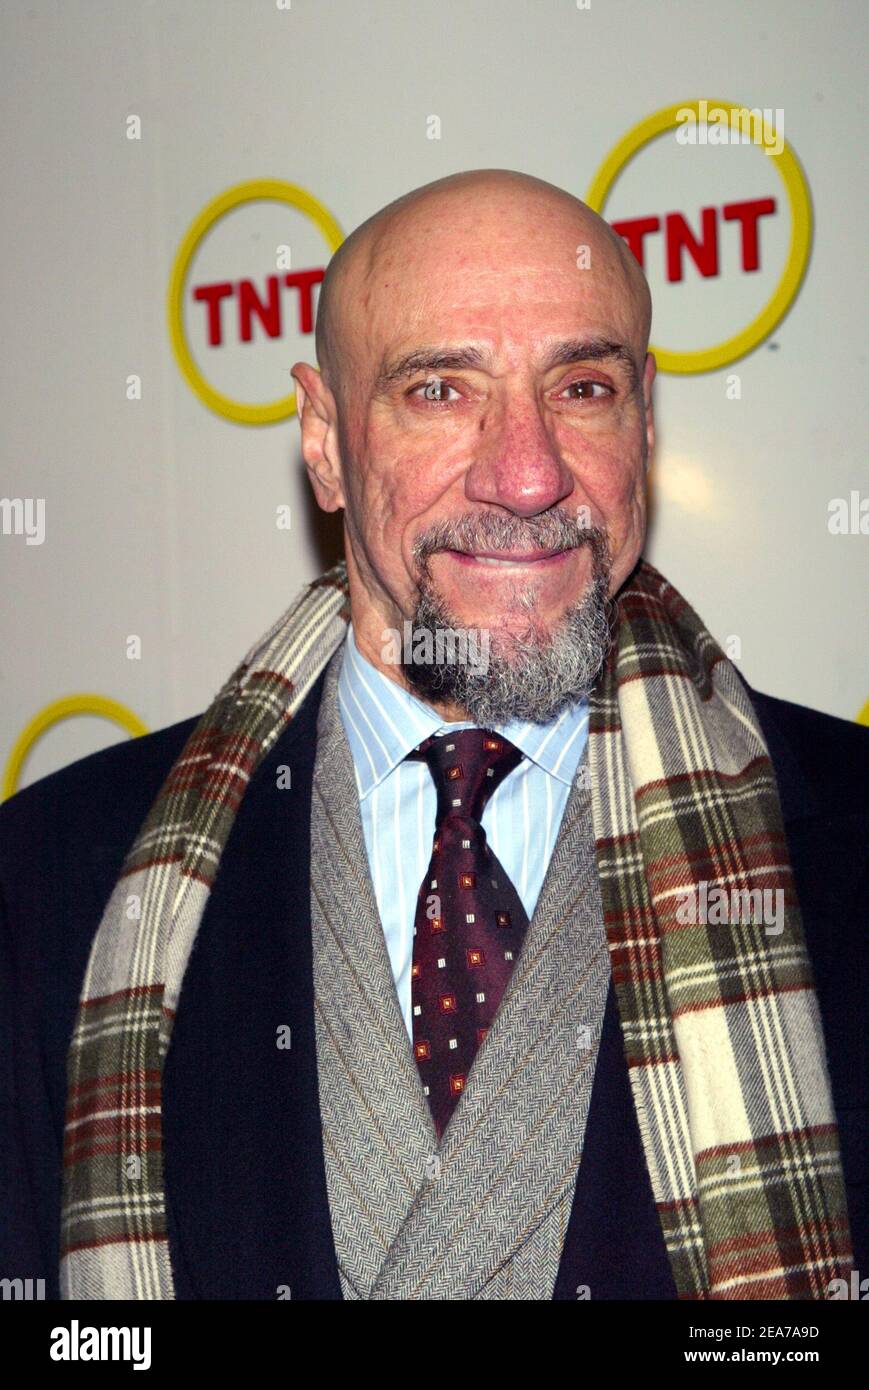 F Murray Abraham attends the special screening of The Goodbye Girl, held at Cinema 1 in New York on Monday, January 12, 2004. (Pictured : F Murray Abraham). Photo by SWF/ABACA Stock Photo